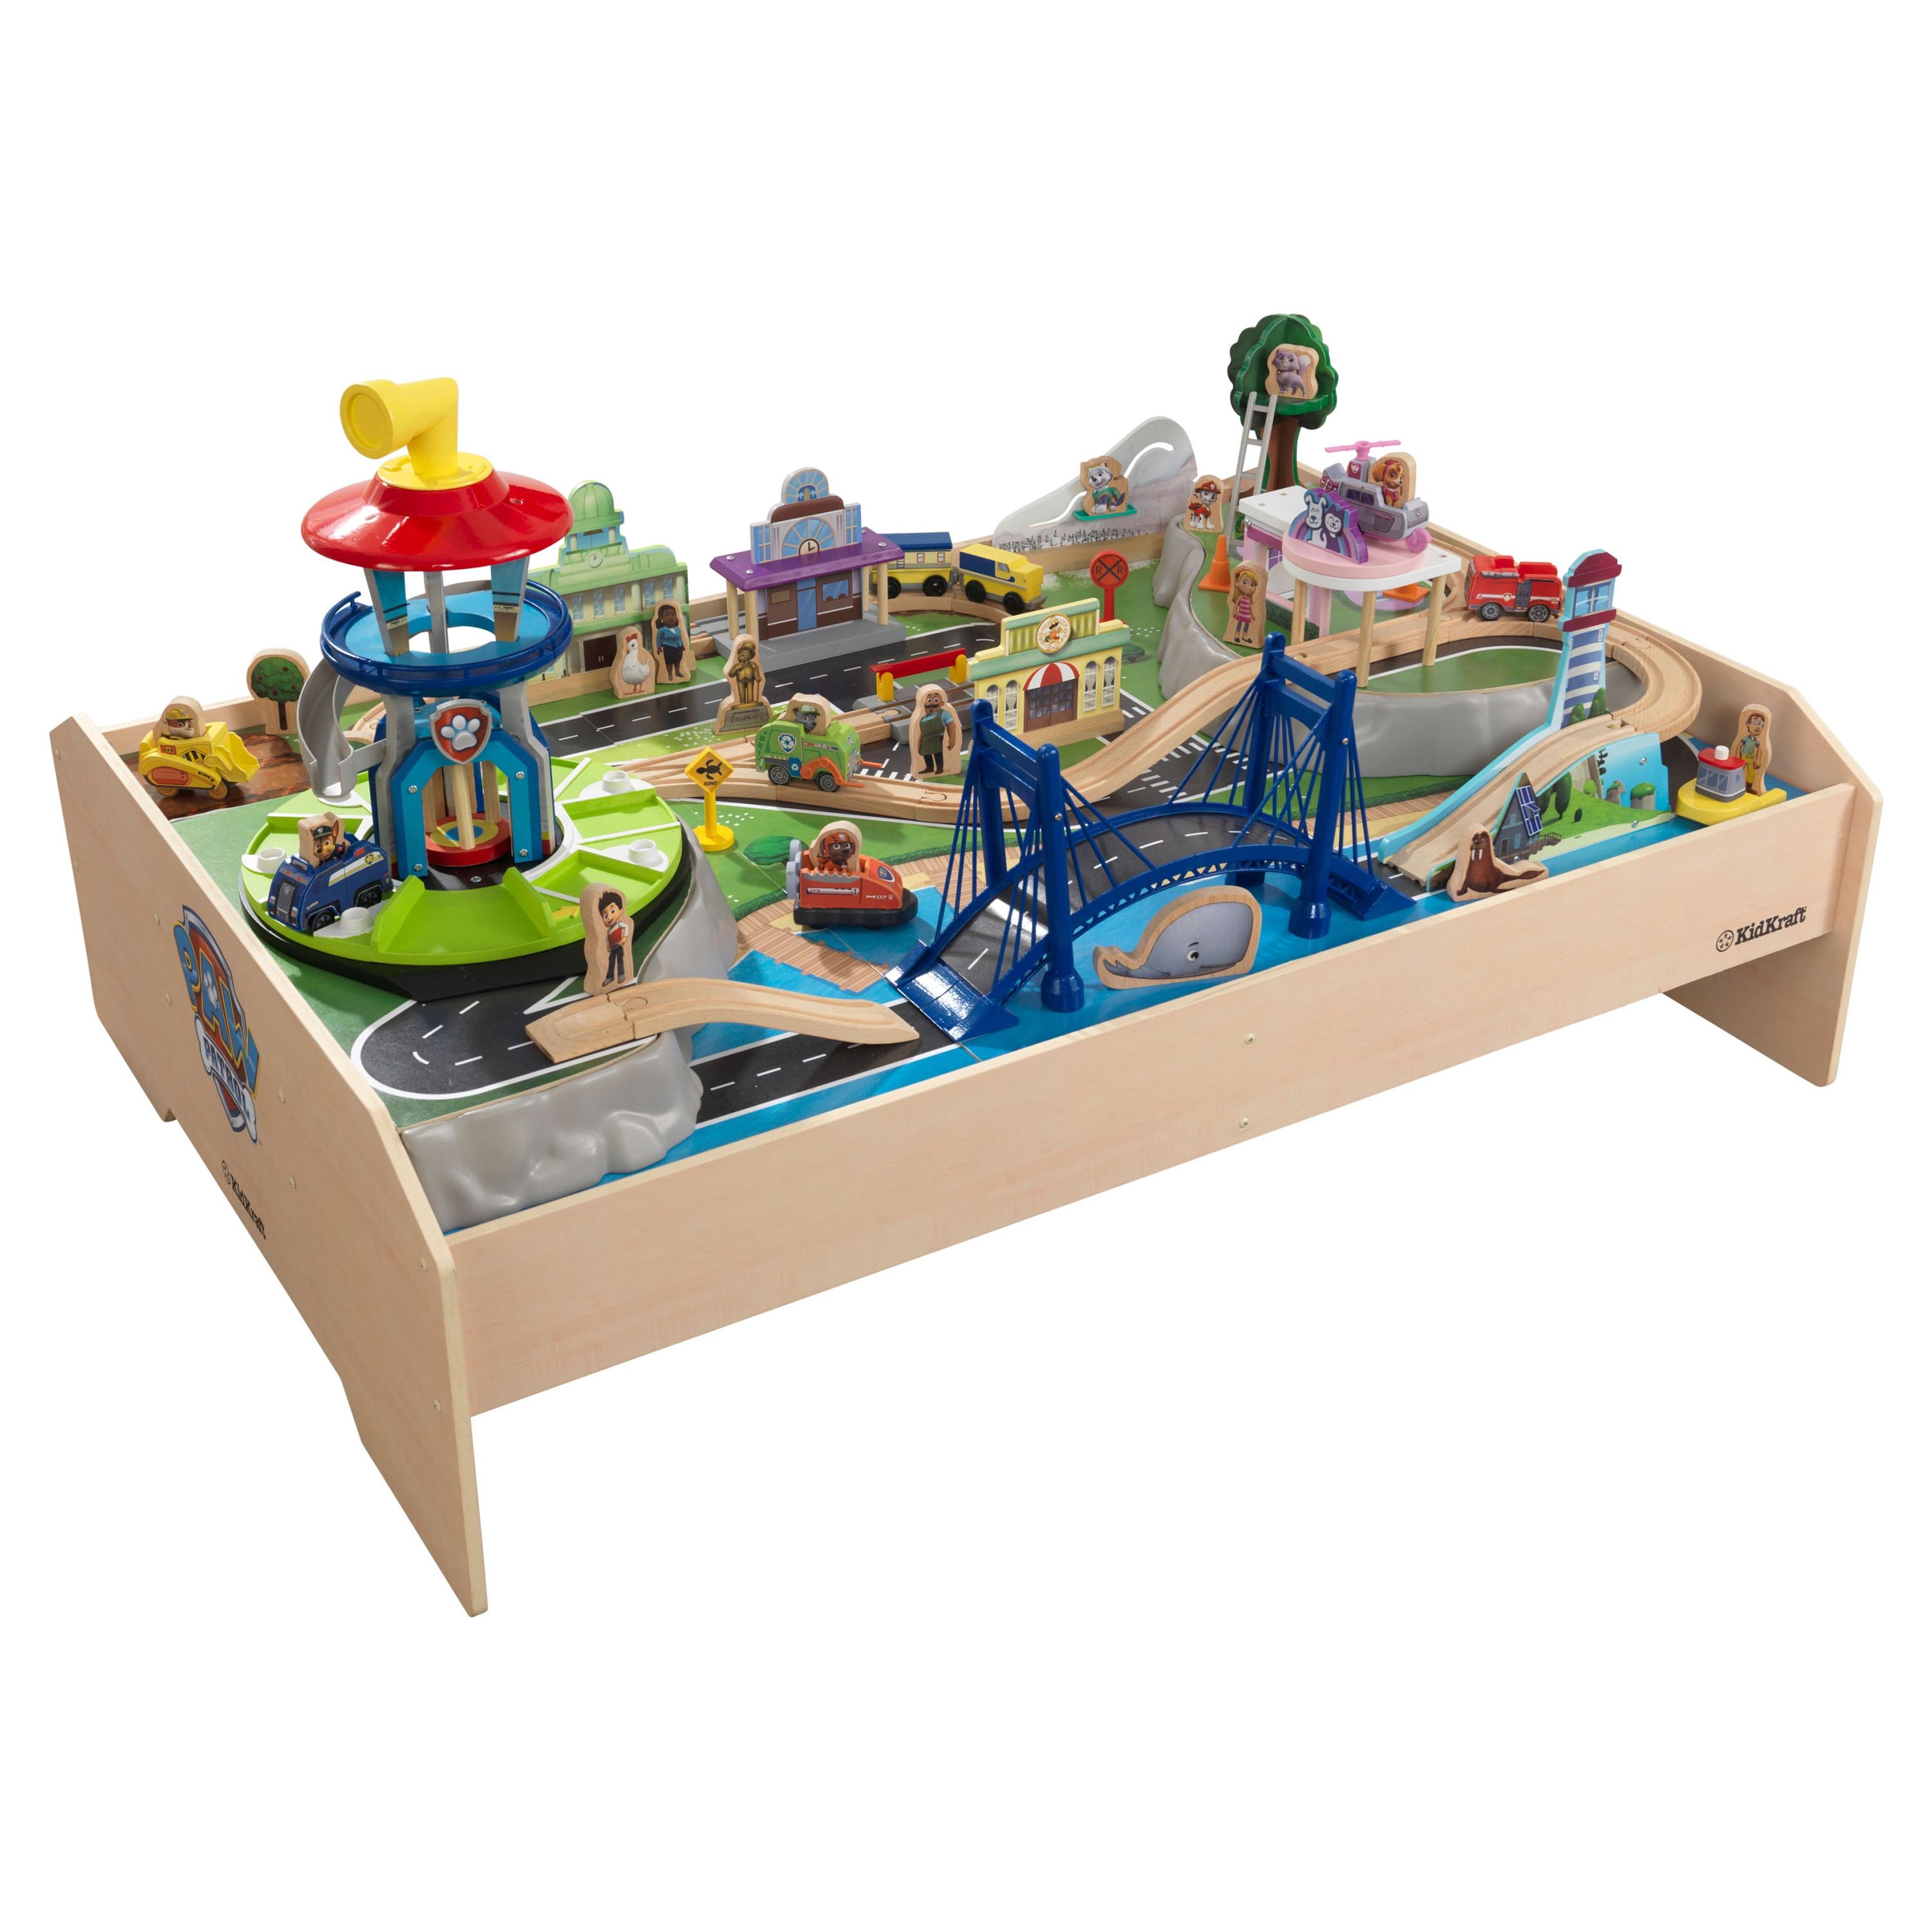 KidKraft PAW Patrol Adventure Bay Wooden Play Table with 73 Accessories - image 1 of 10